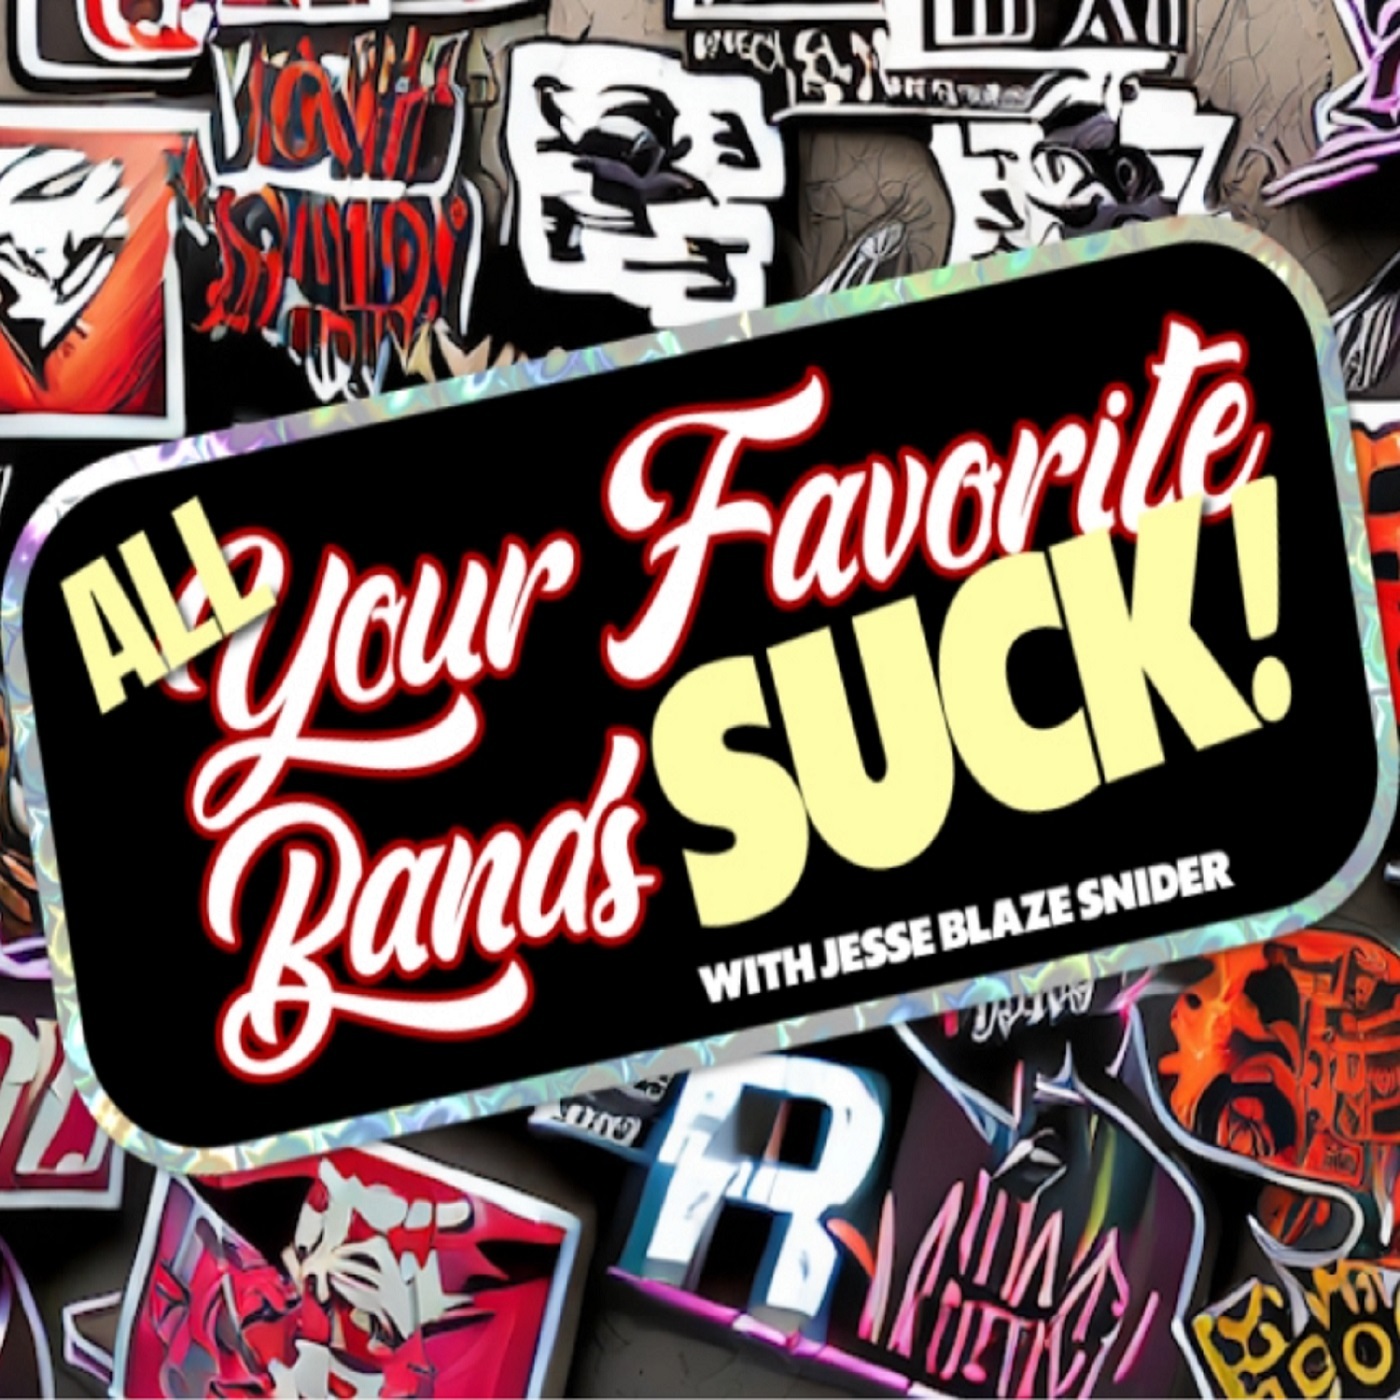 ALL Your Favorite Bands SUCK! - The Detroit Cobras